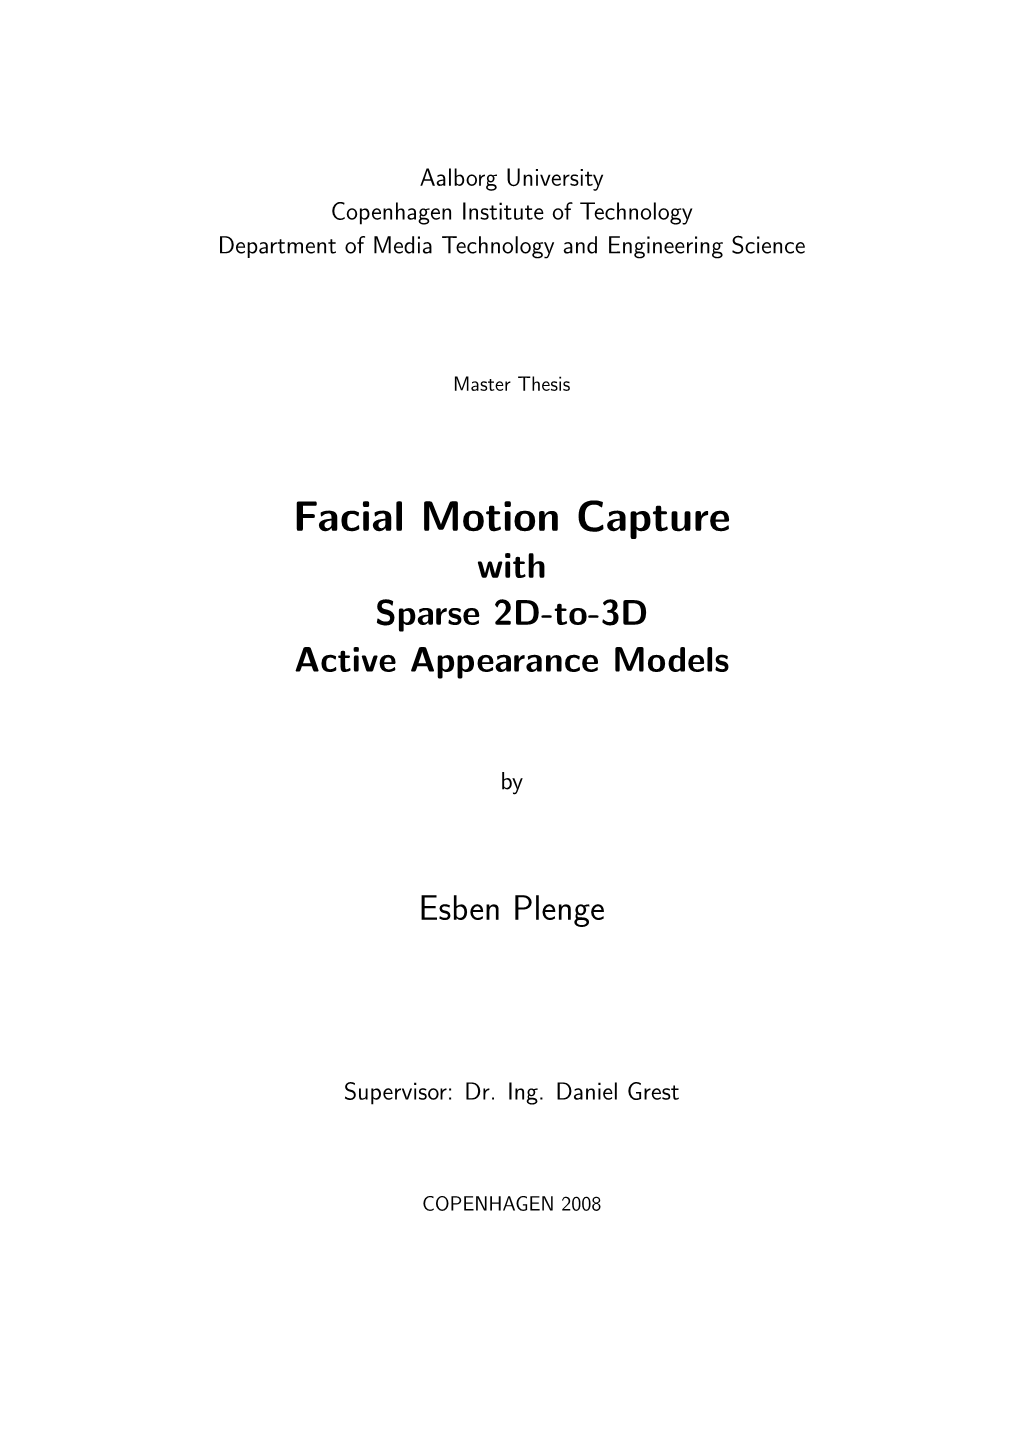 Facial Motion Capture with Sparse 2D-To-3D Active Appearance Models